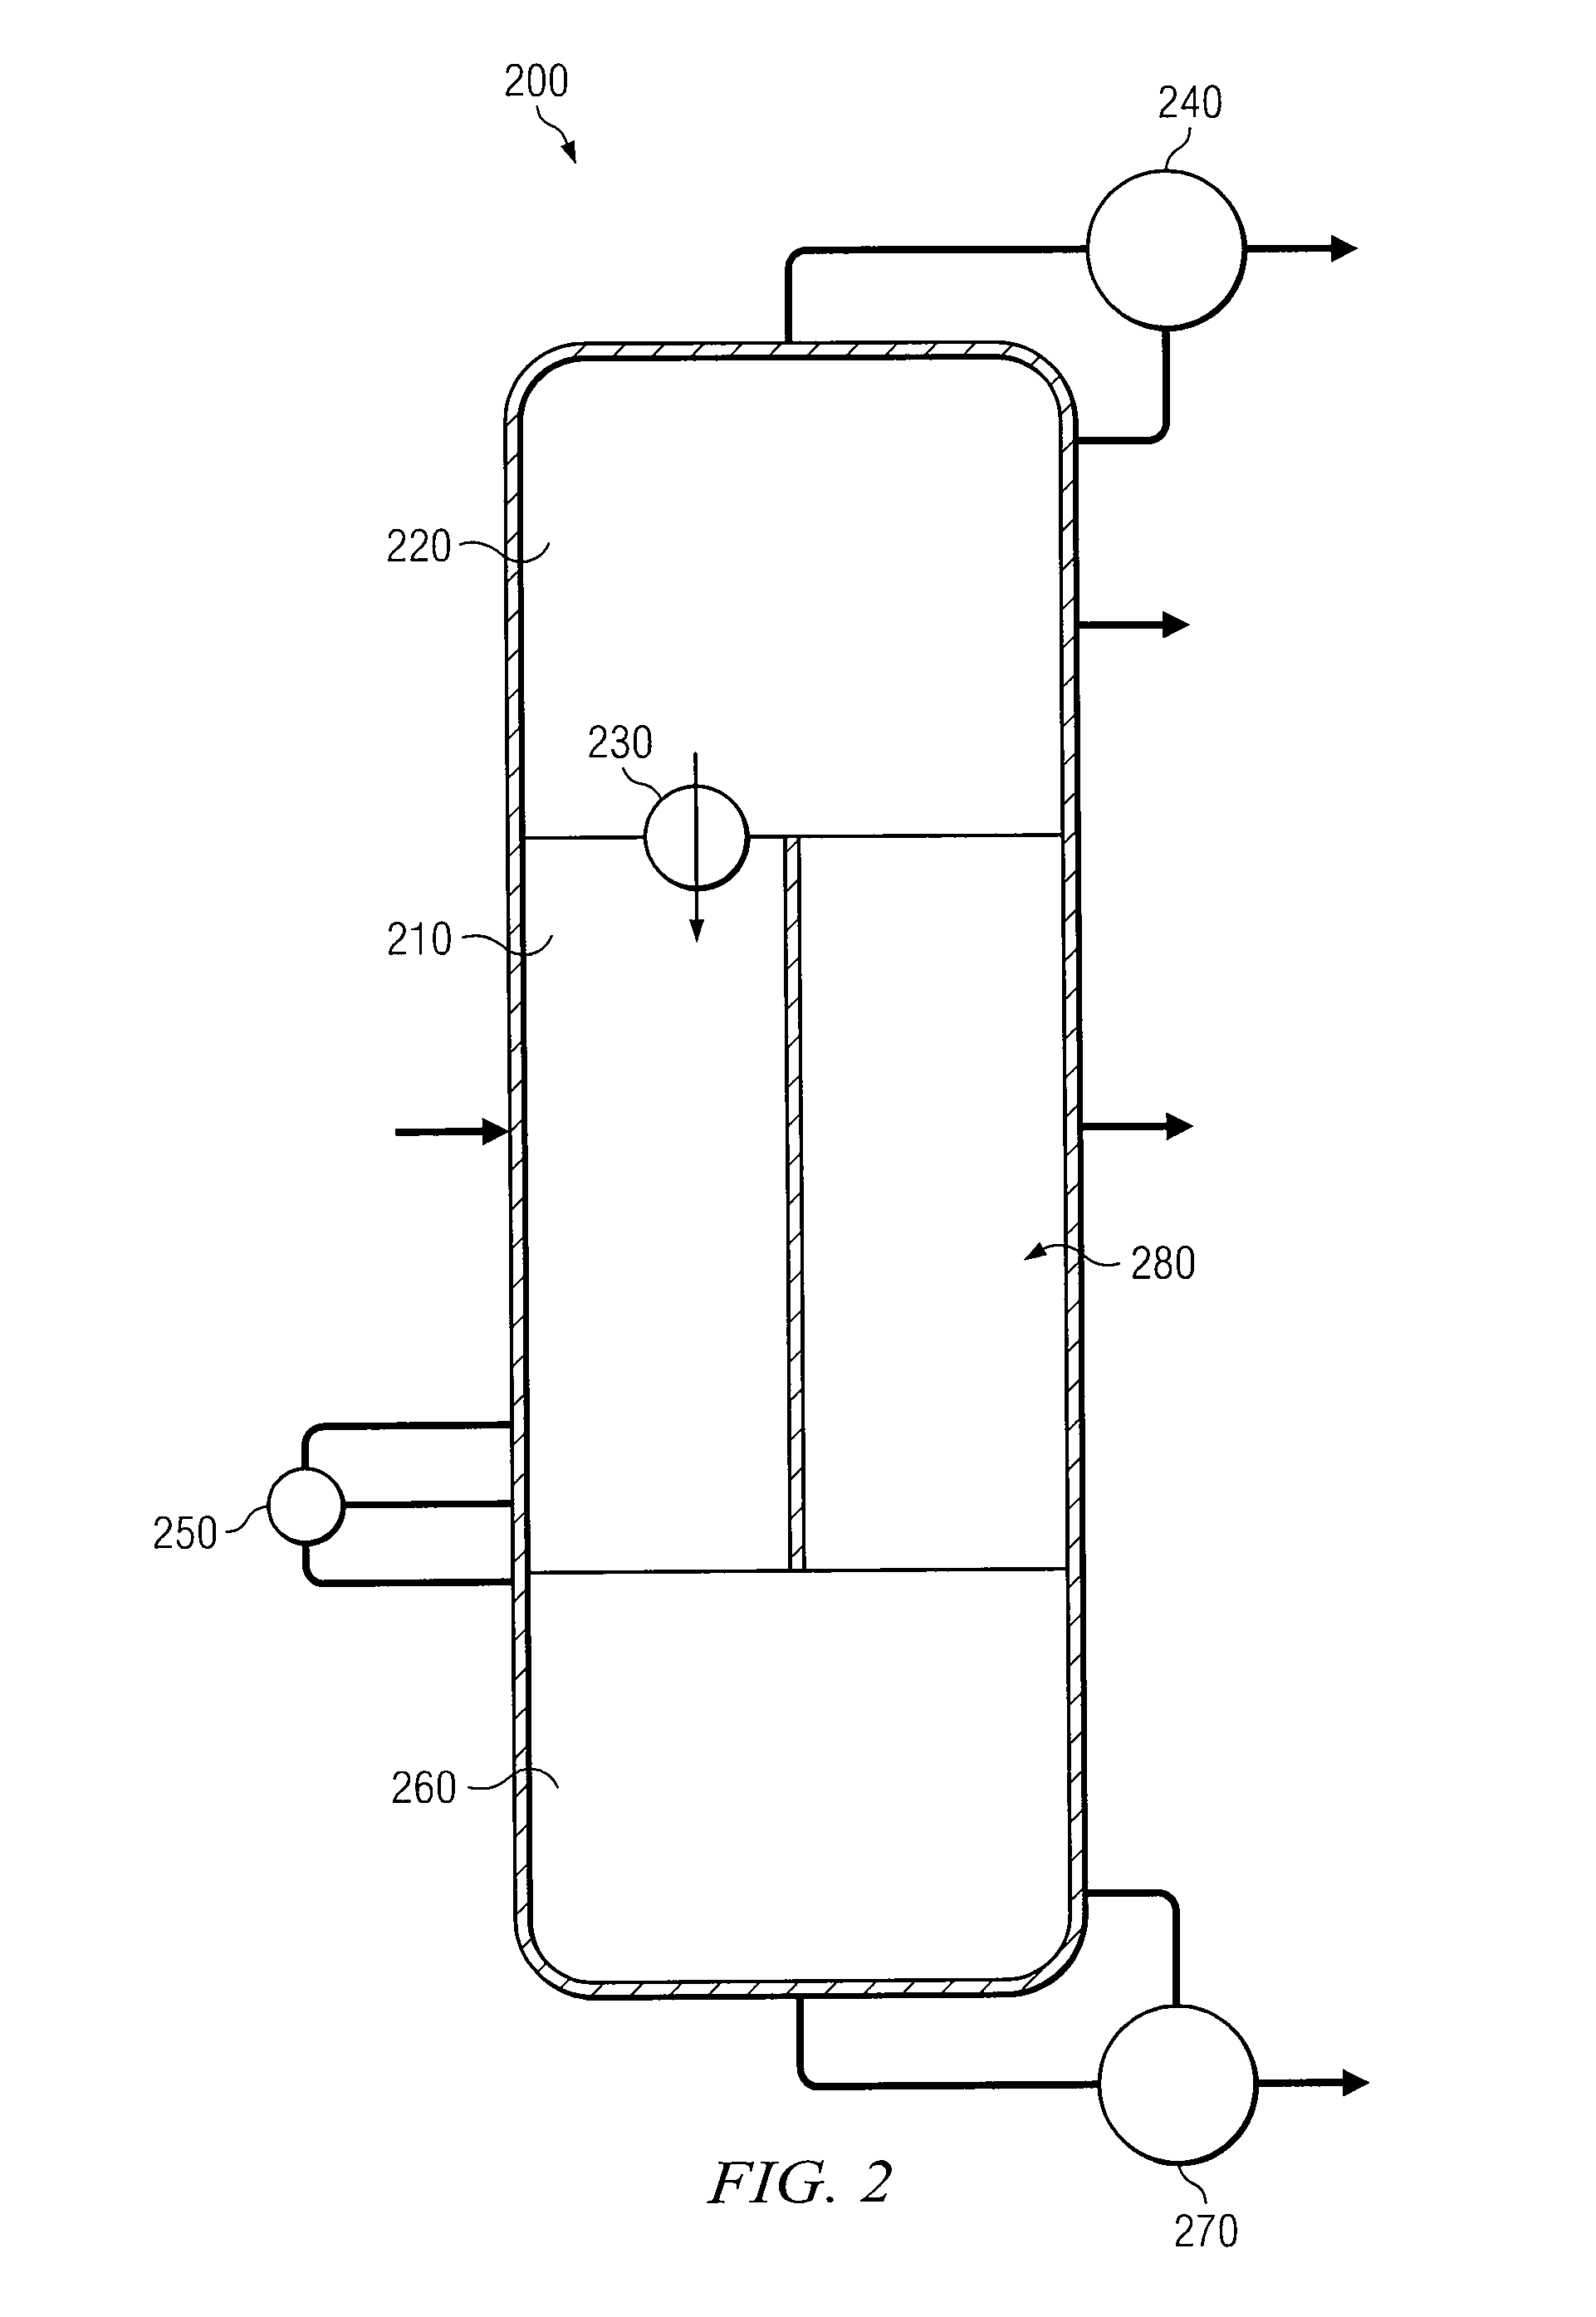 Apparatus, Systems, and Methods for Purification of Isocyanate Mixtures